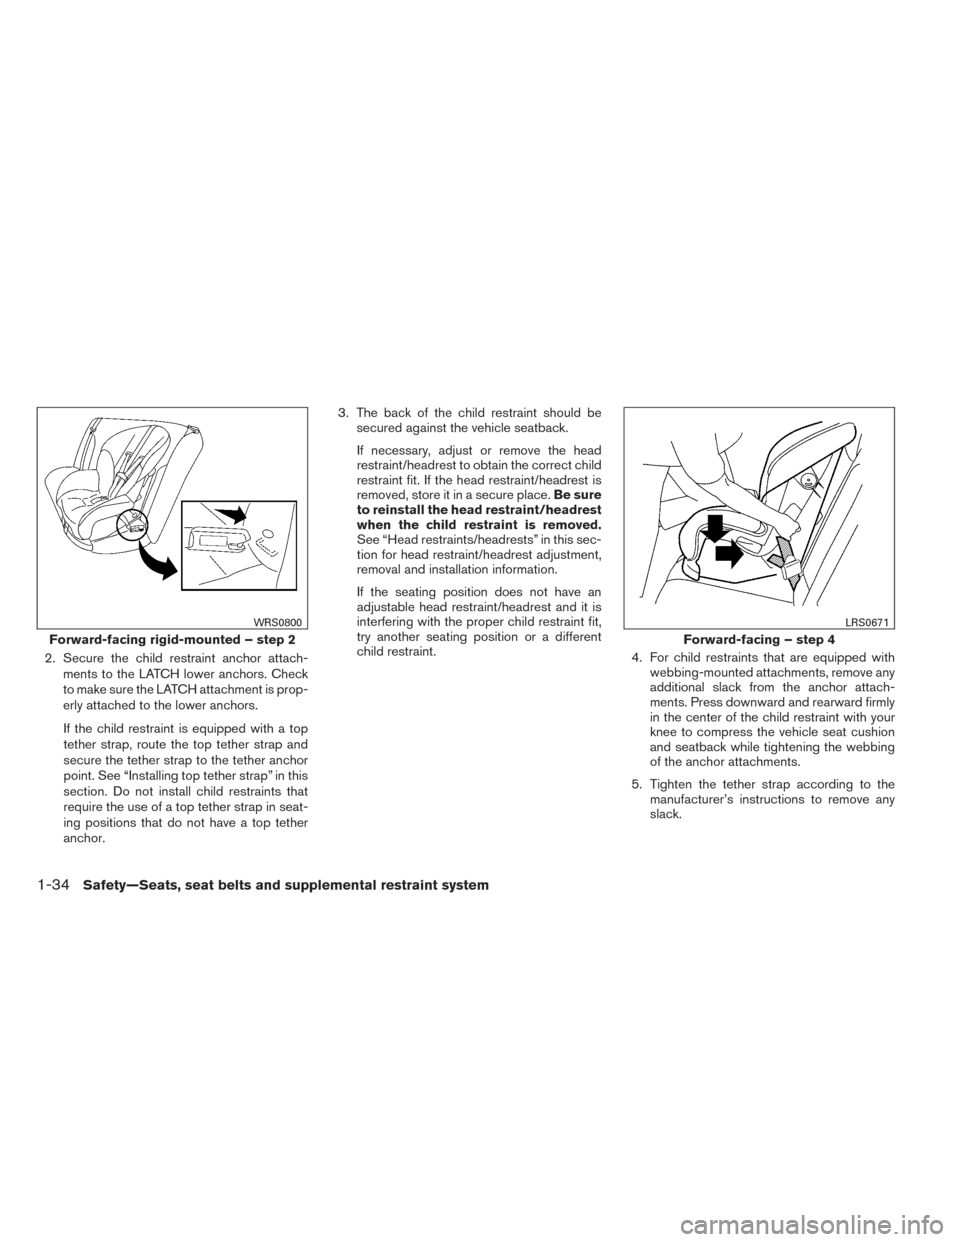 NISSAN ALTIMA 2014 L33 / 5.G Workshop Manual 2. Secure the child restraint anchor attach-ments to the LATCH lower anchors. Check
to make sure the LATCH attachment is prop-
erly attached to the lower anchors.
If the child restraint is equipped wi